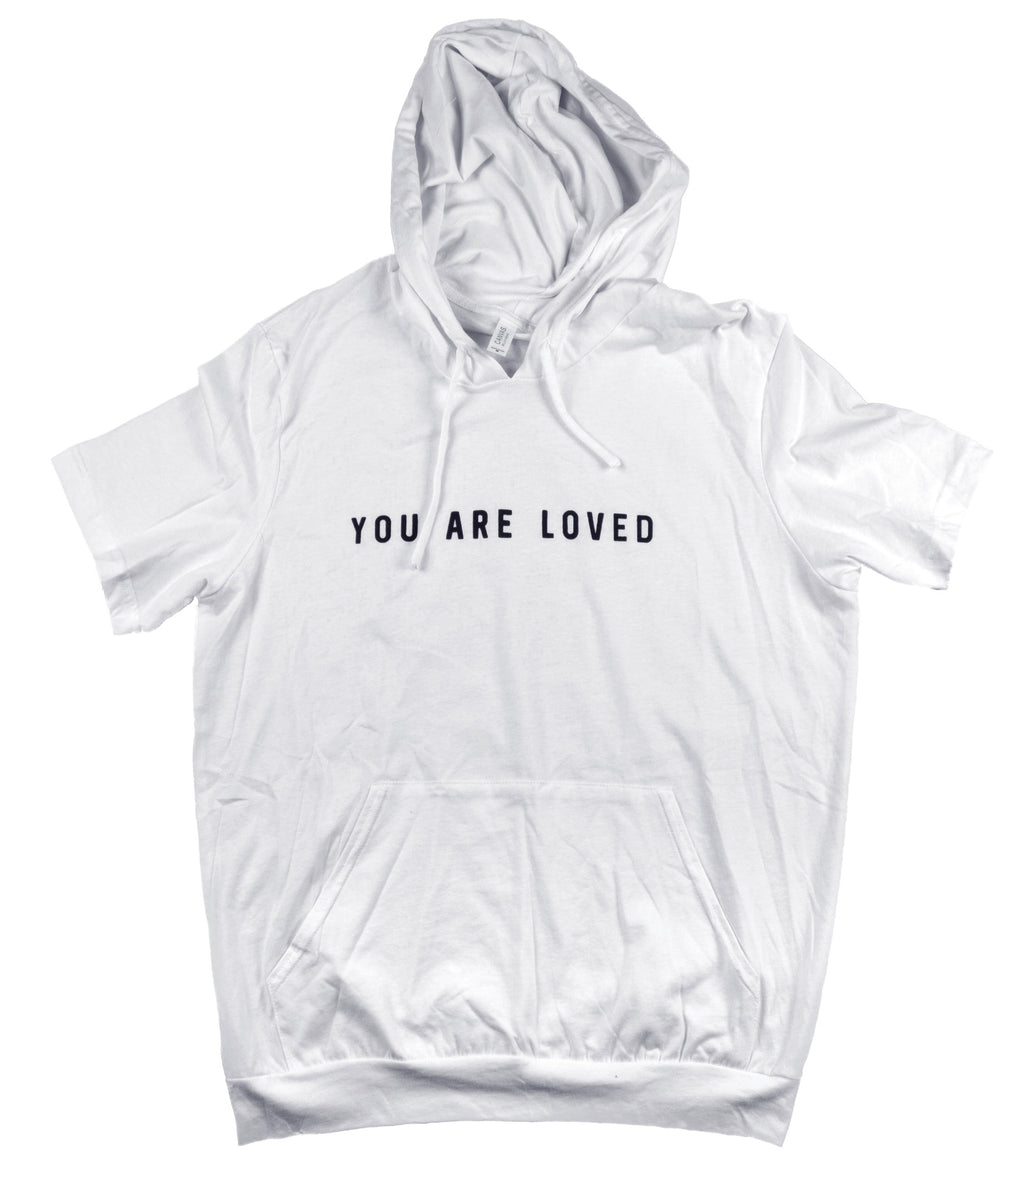 YOU ARE LOVED WHITE JERSEY SHORT SLEEVE HOODIE